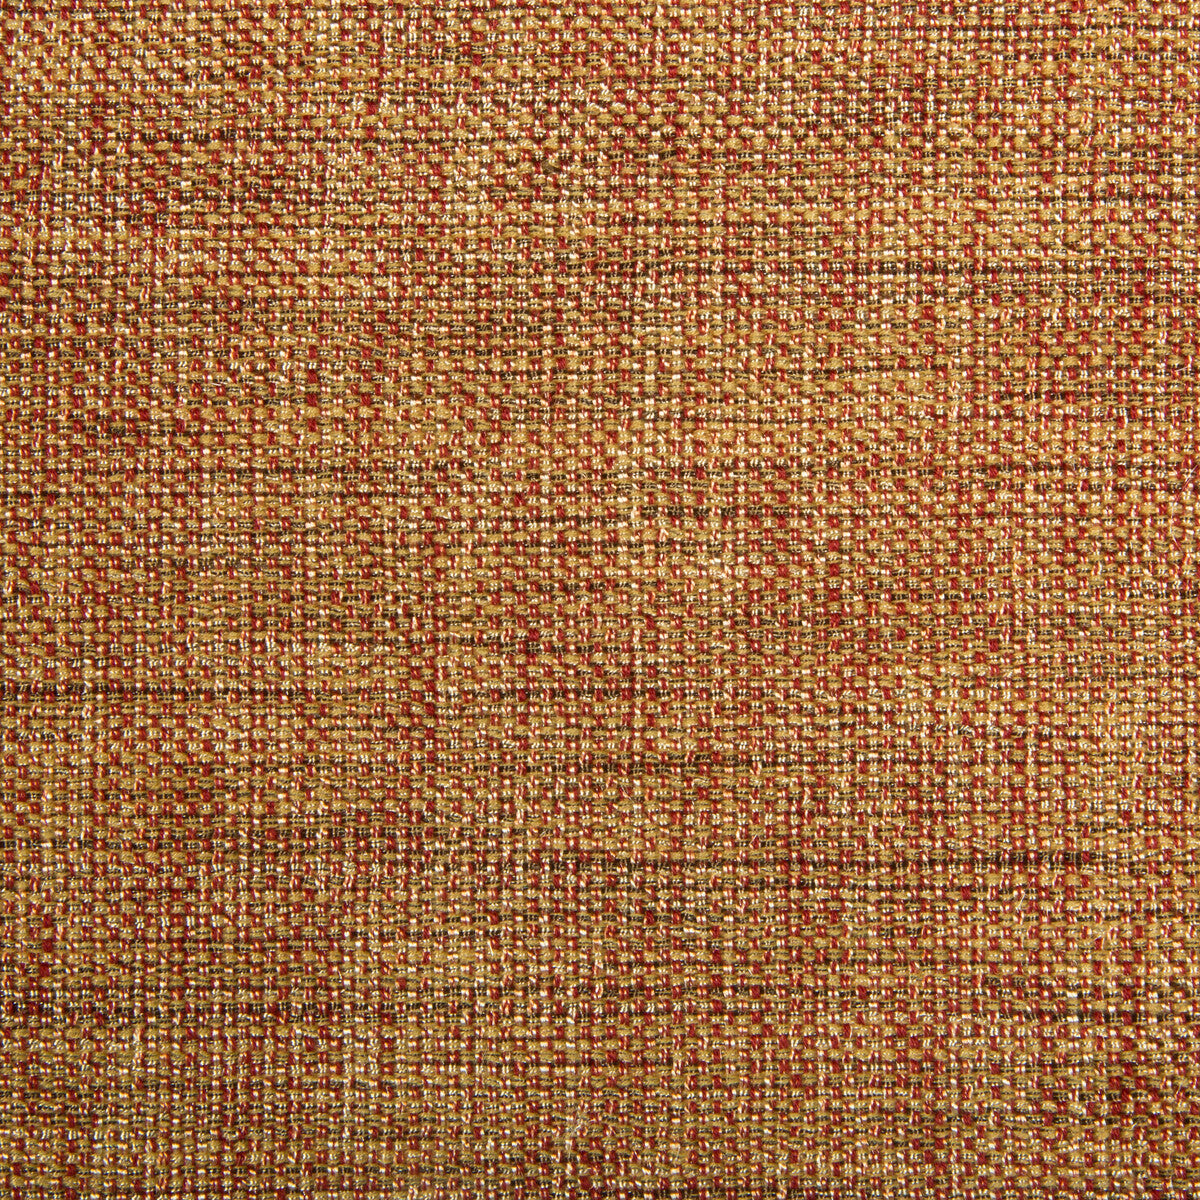 Kravet Contract fabric in 4458-624 color - pattern 4458.624.0 - by Kravet Contract